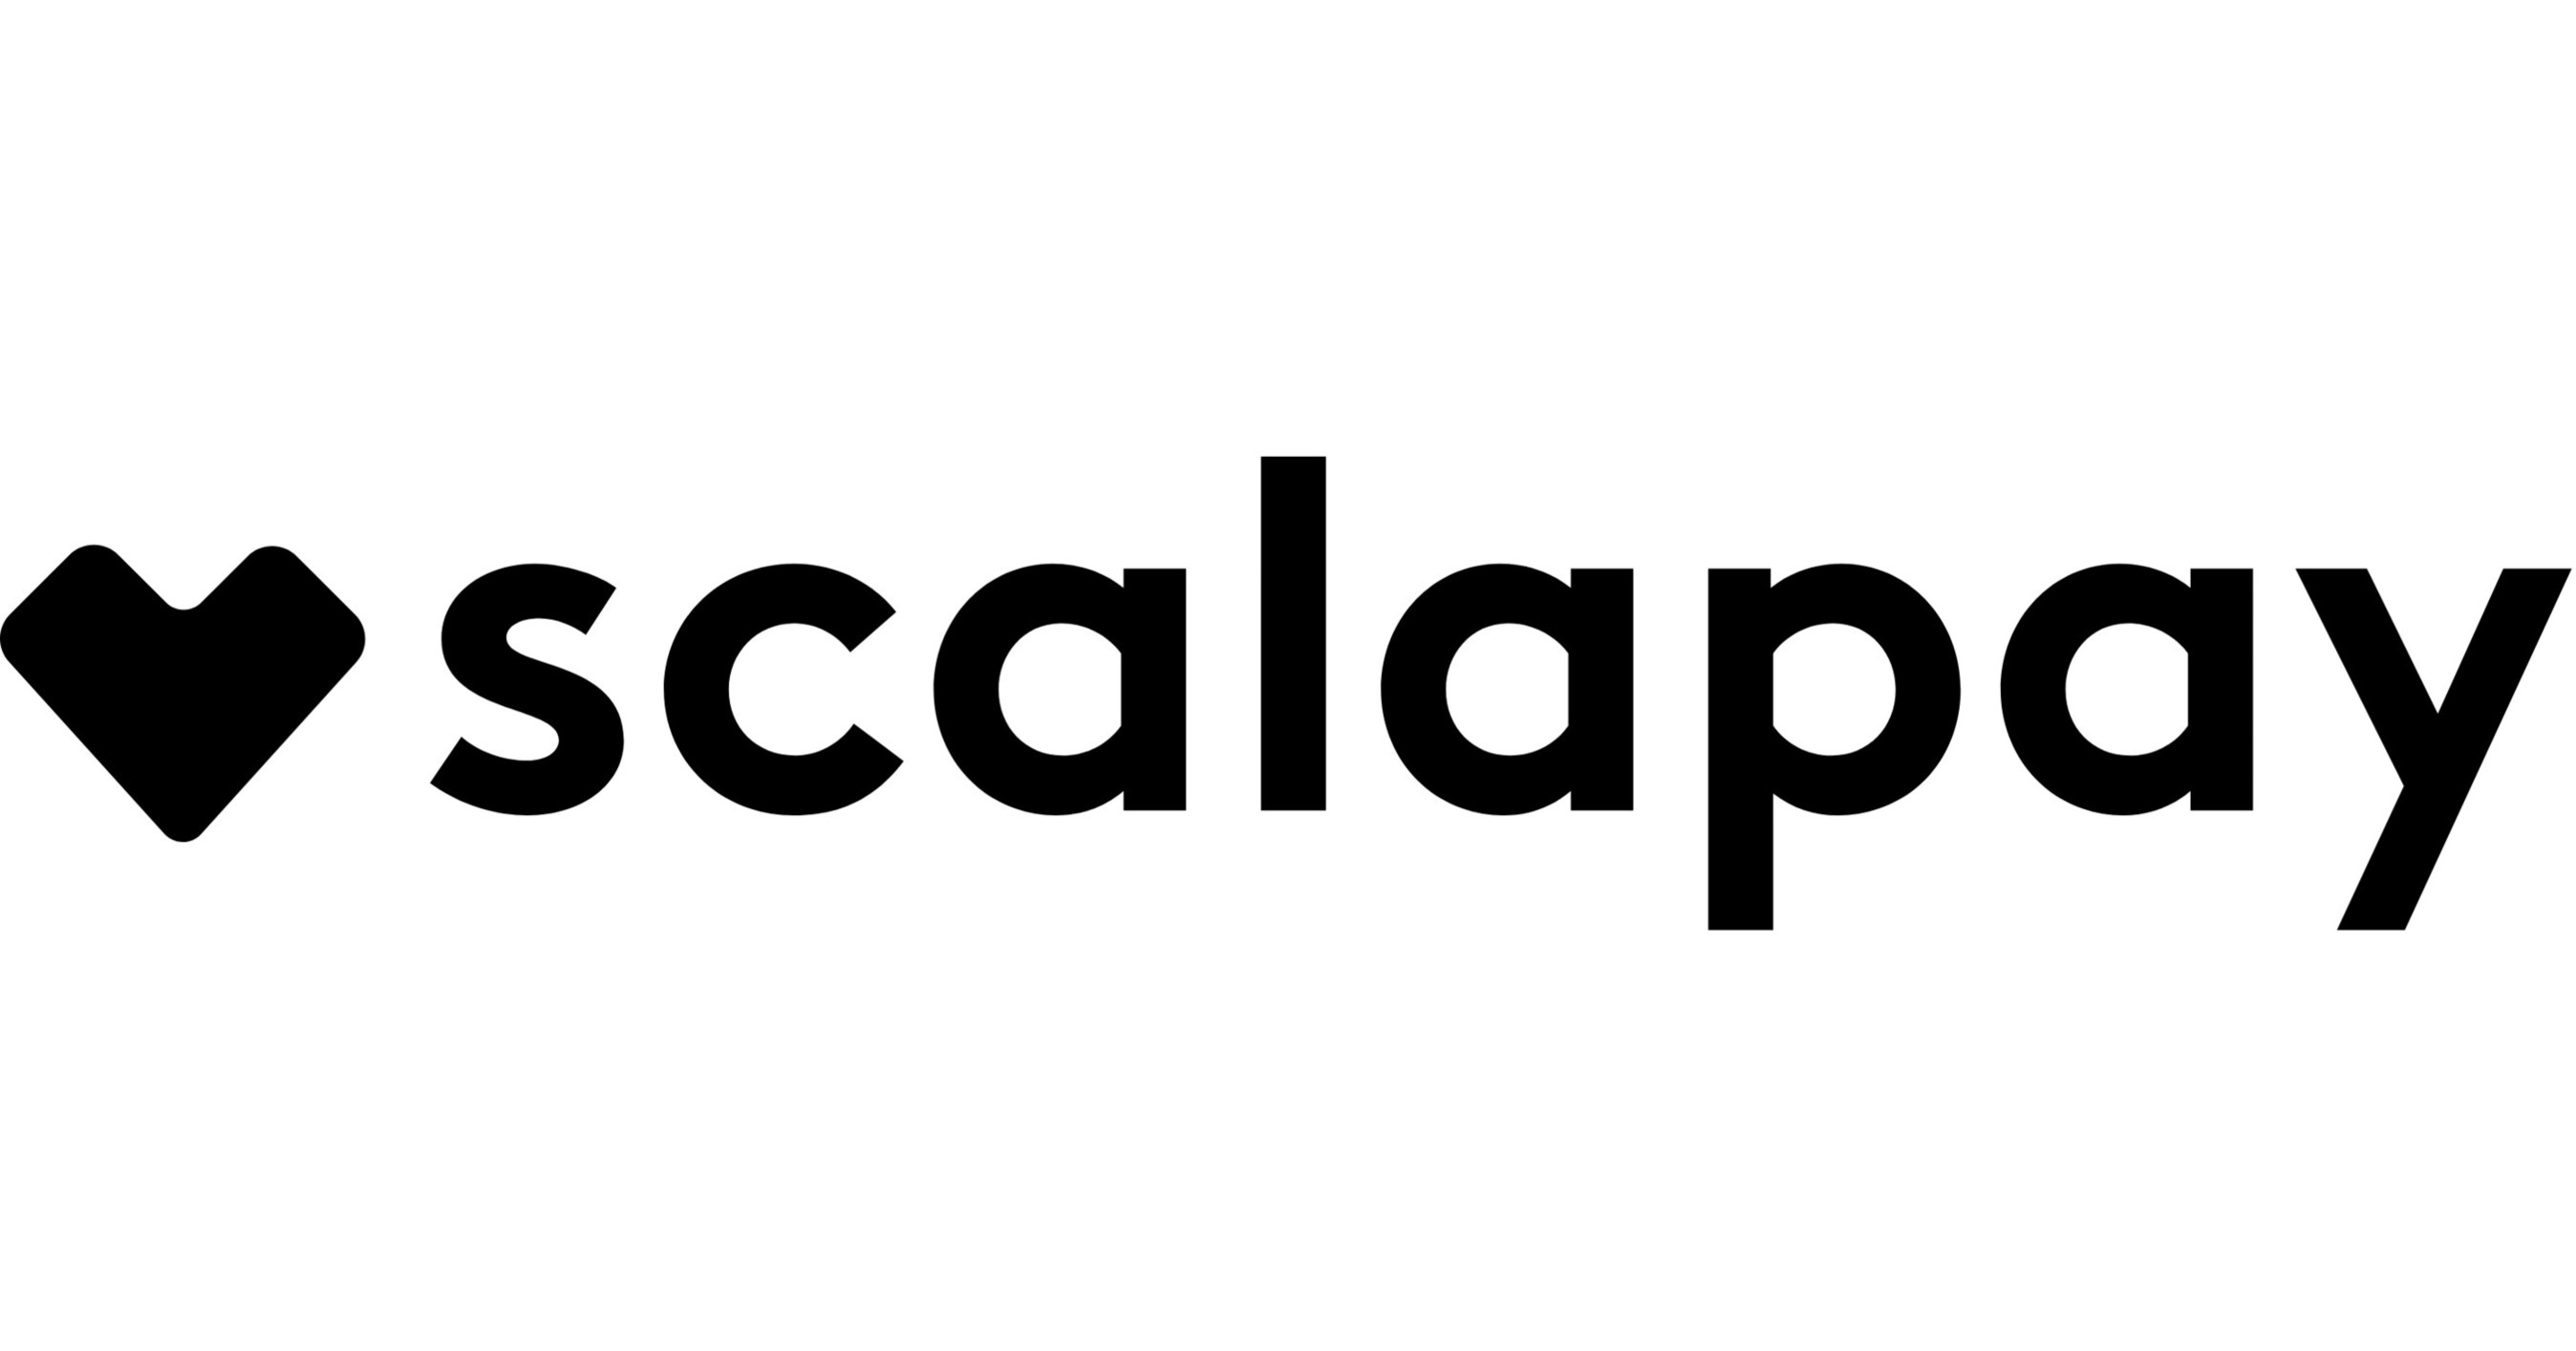 scalapay raises $48m to give thousands of merchants a single payment solution & access to 1m merchant referrals